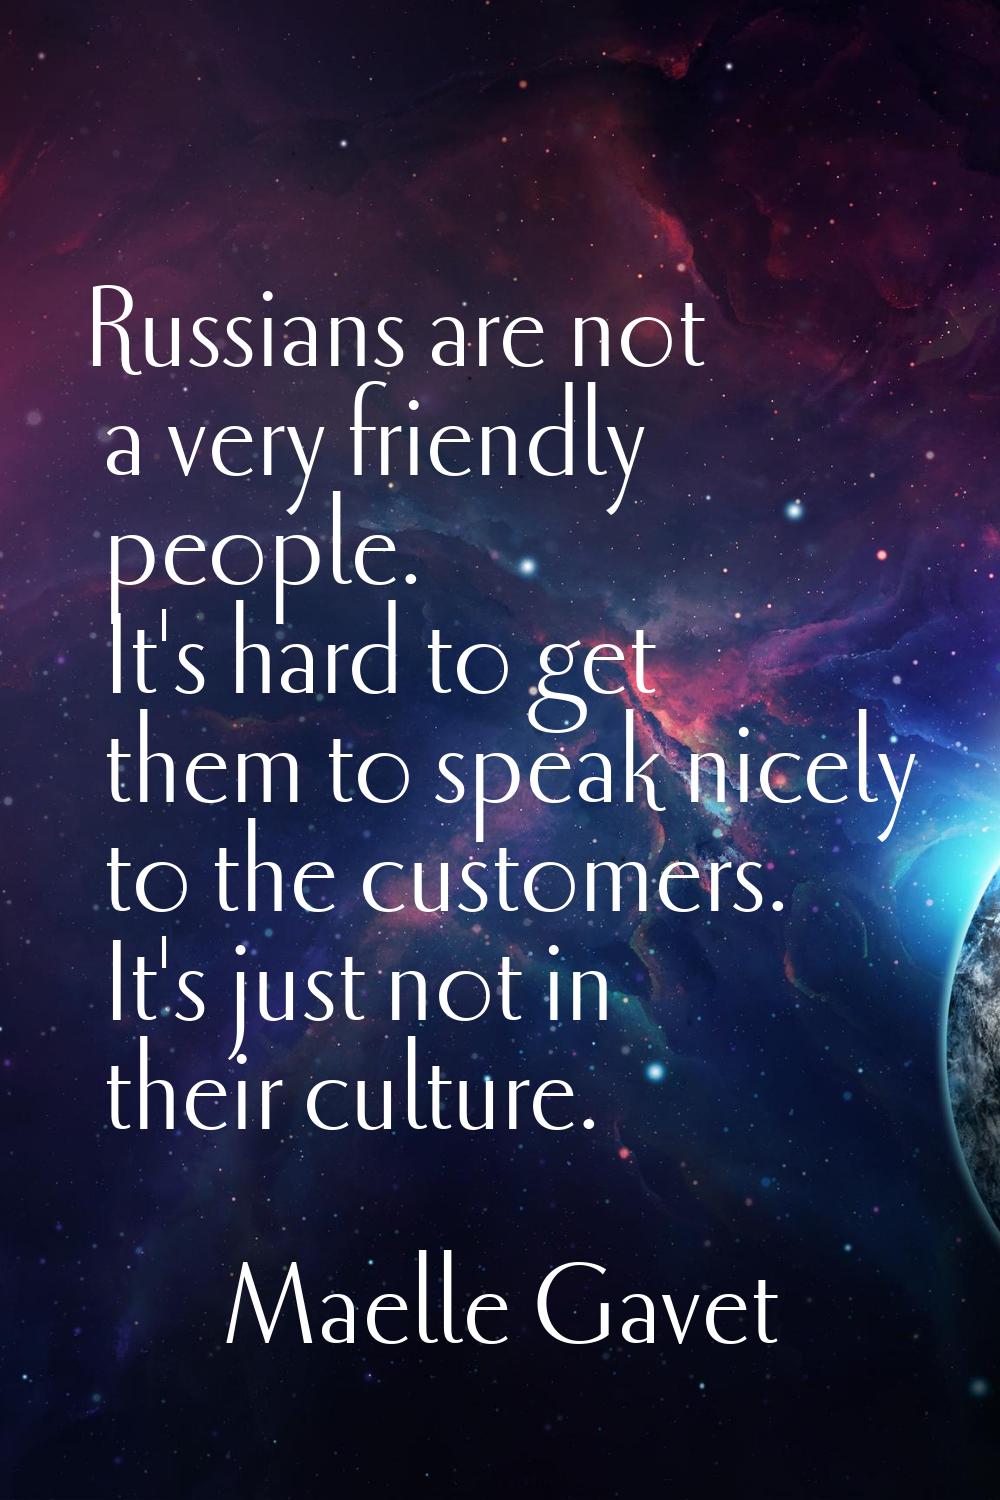 Russians are not a very friendly people. It's hard to get them to speak nicely to the customers. It